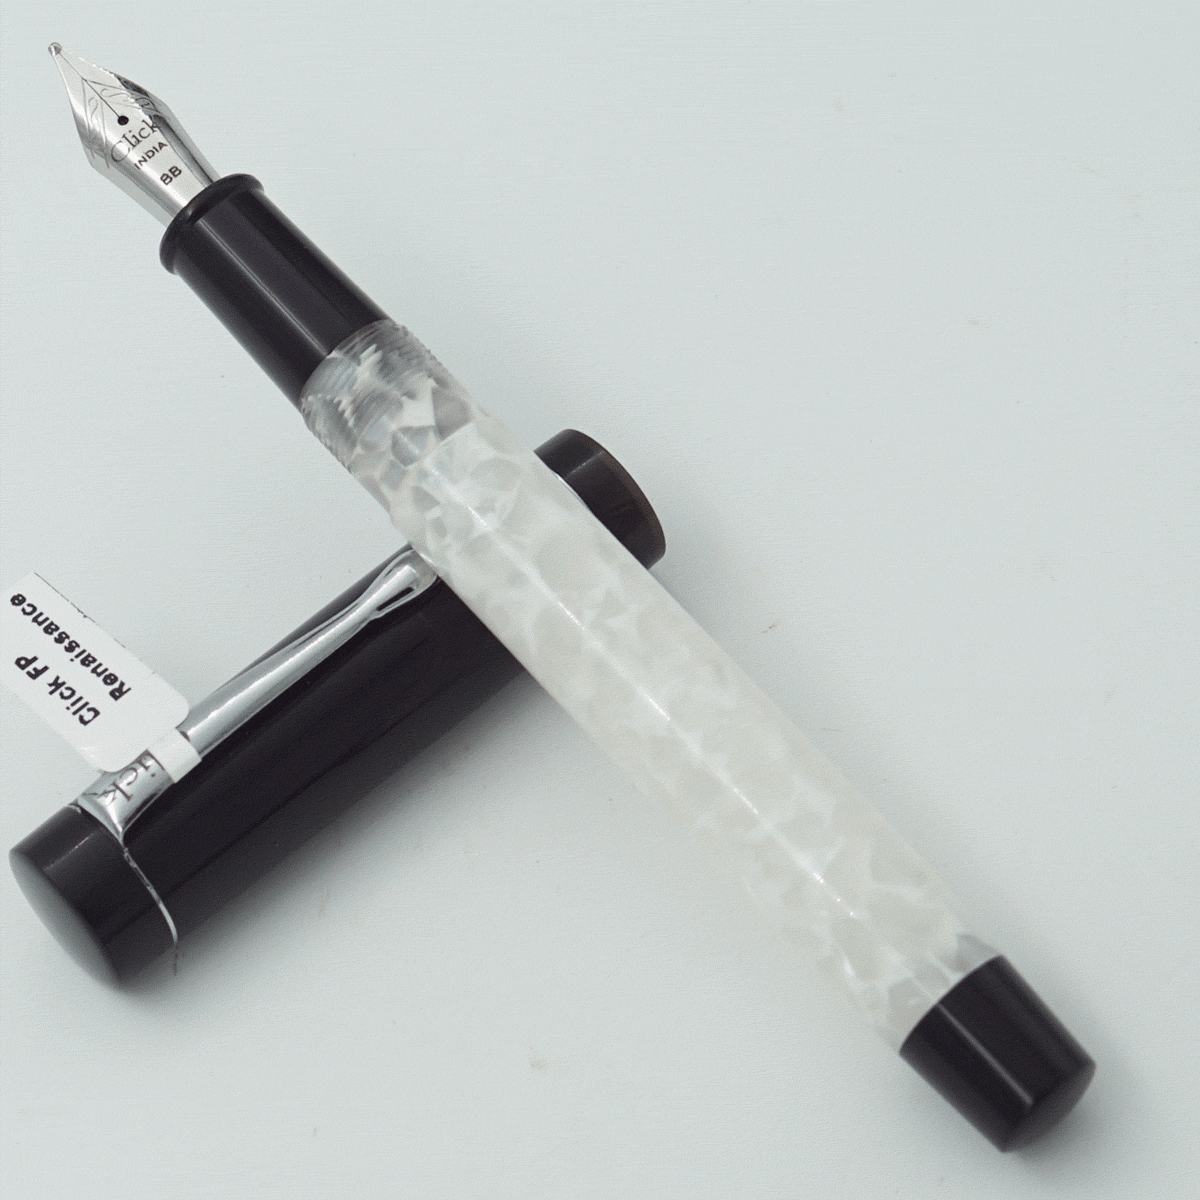 Click Renaissance White Color Marble Acrylic Body And Black Color Cap With Silver Clip No 35 SSF BB Double Broad Nib Eye Dropper Model Fountain Pen (3 in 1) (Nib Can be Customised) SKU 24040